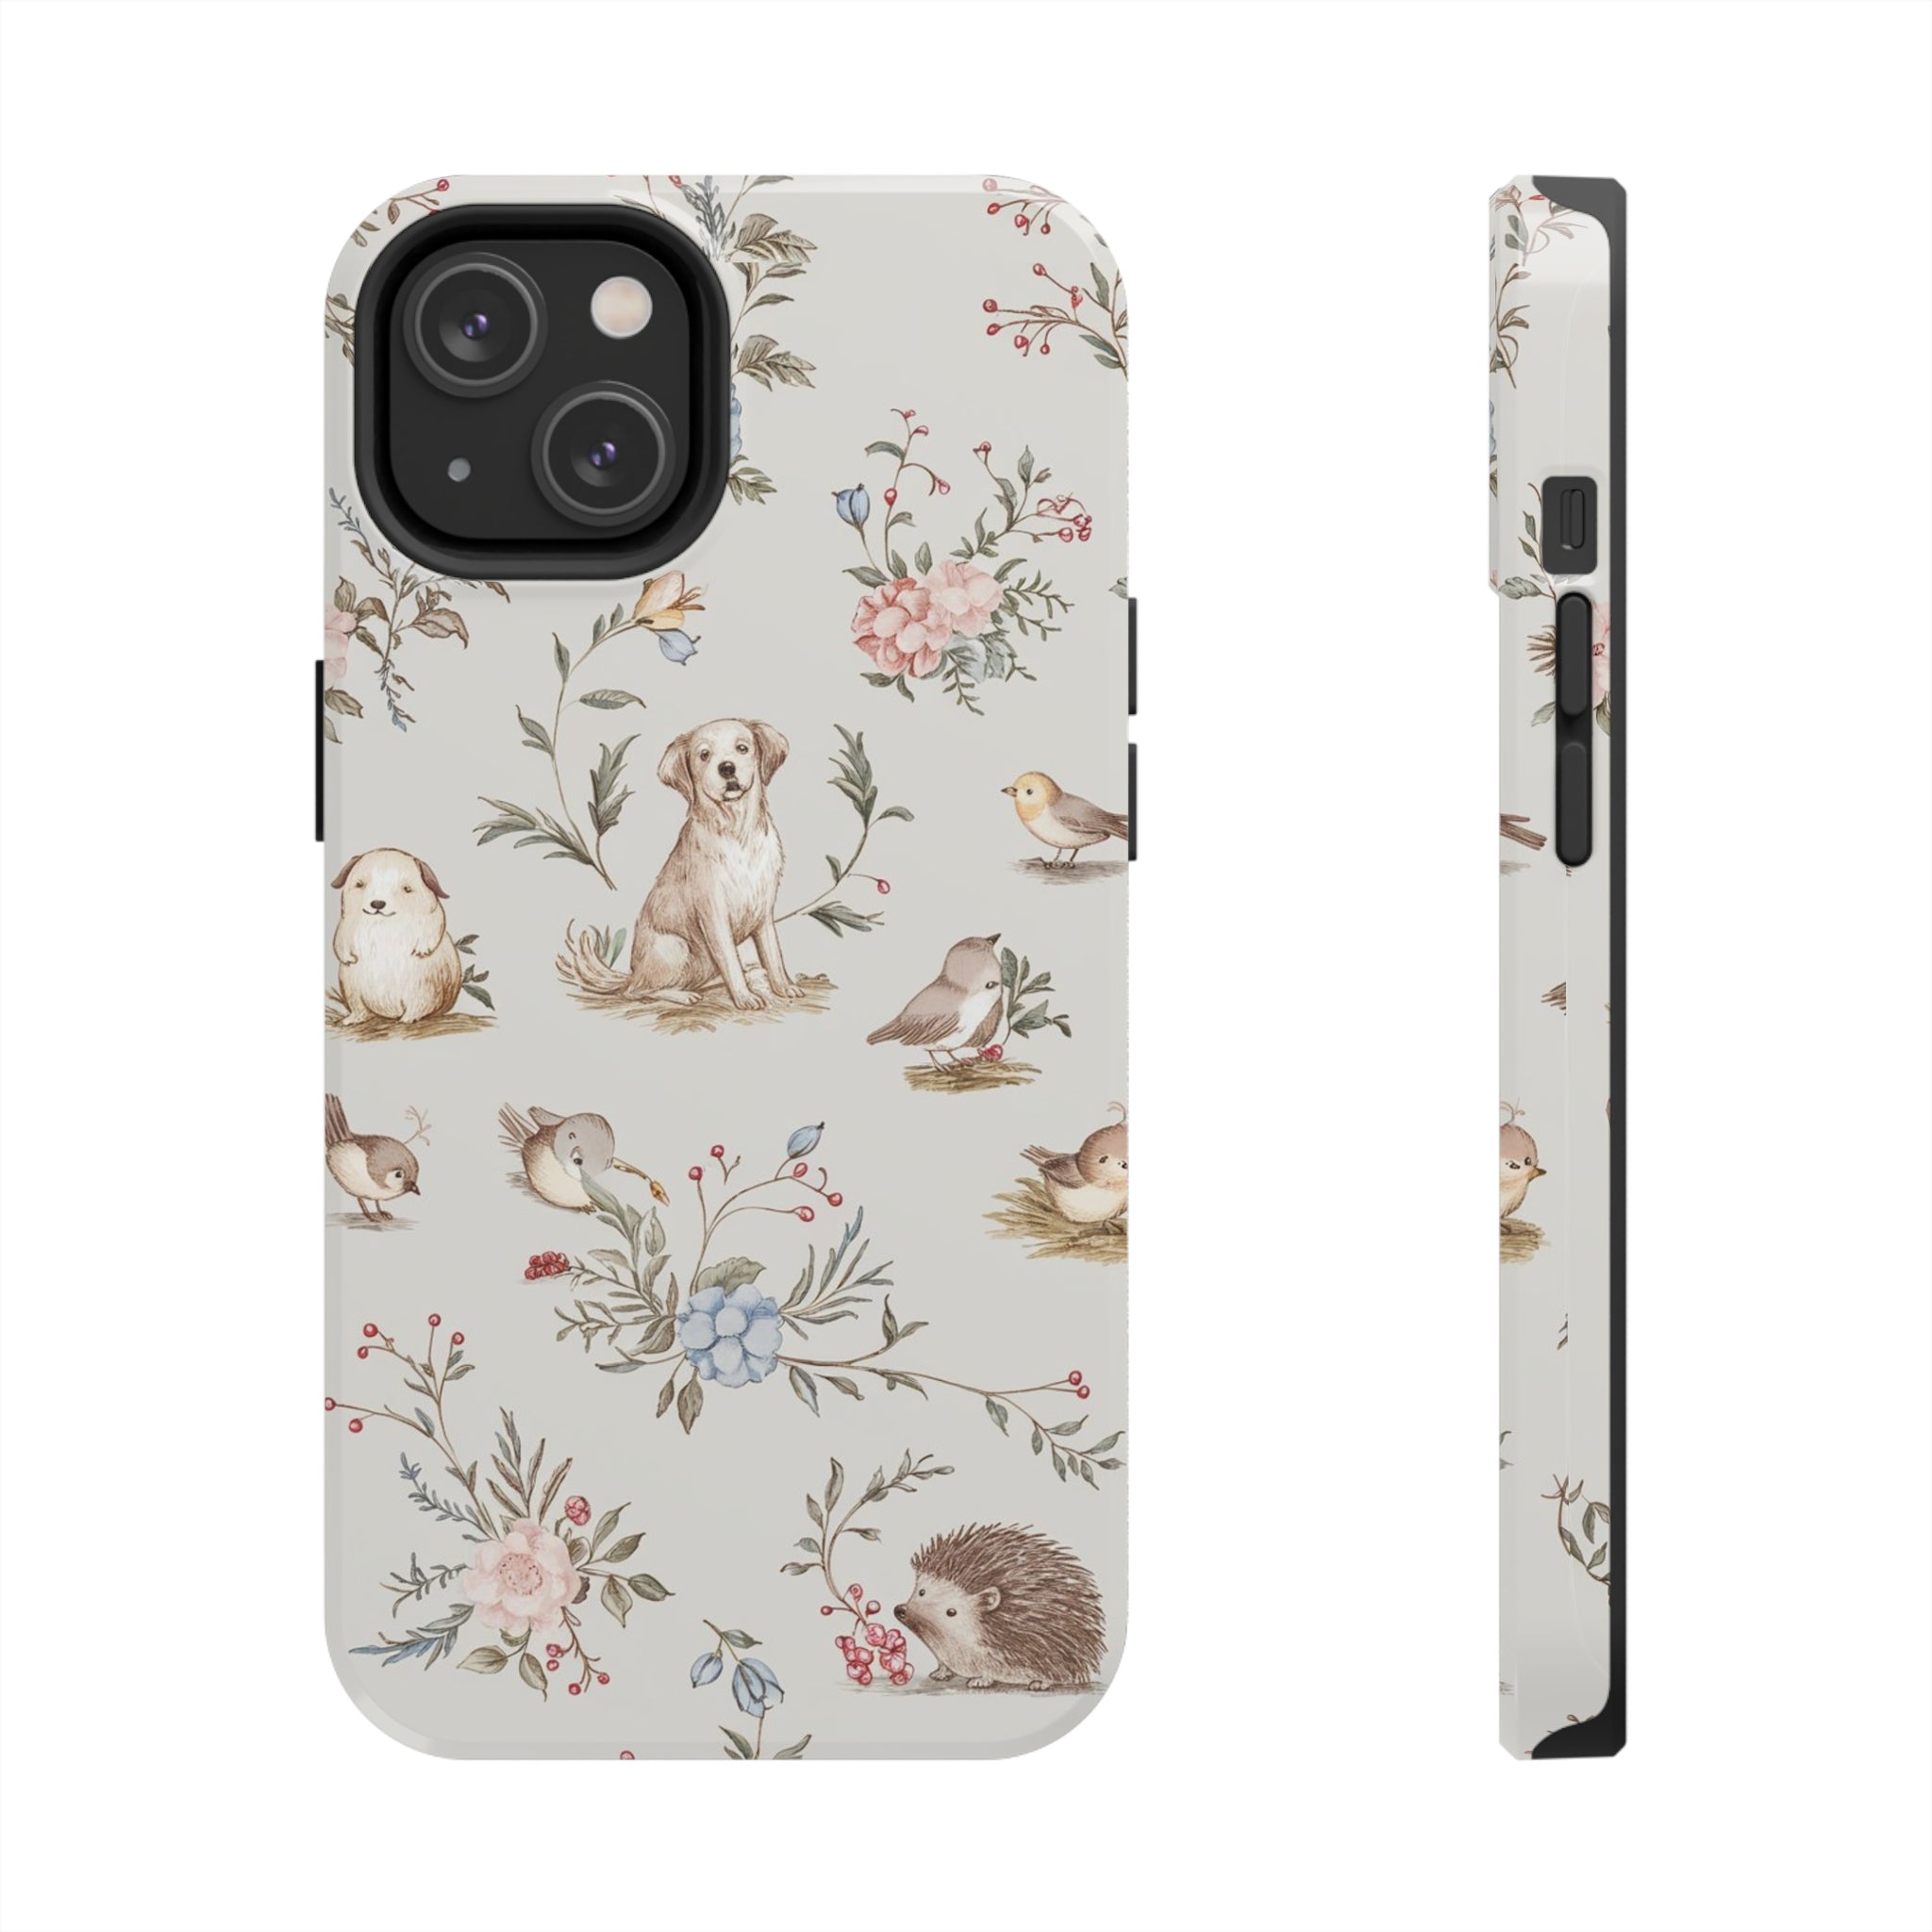 Afternoon Nature Walk - Tough Phone Cases